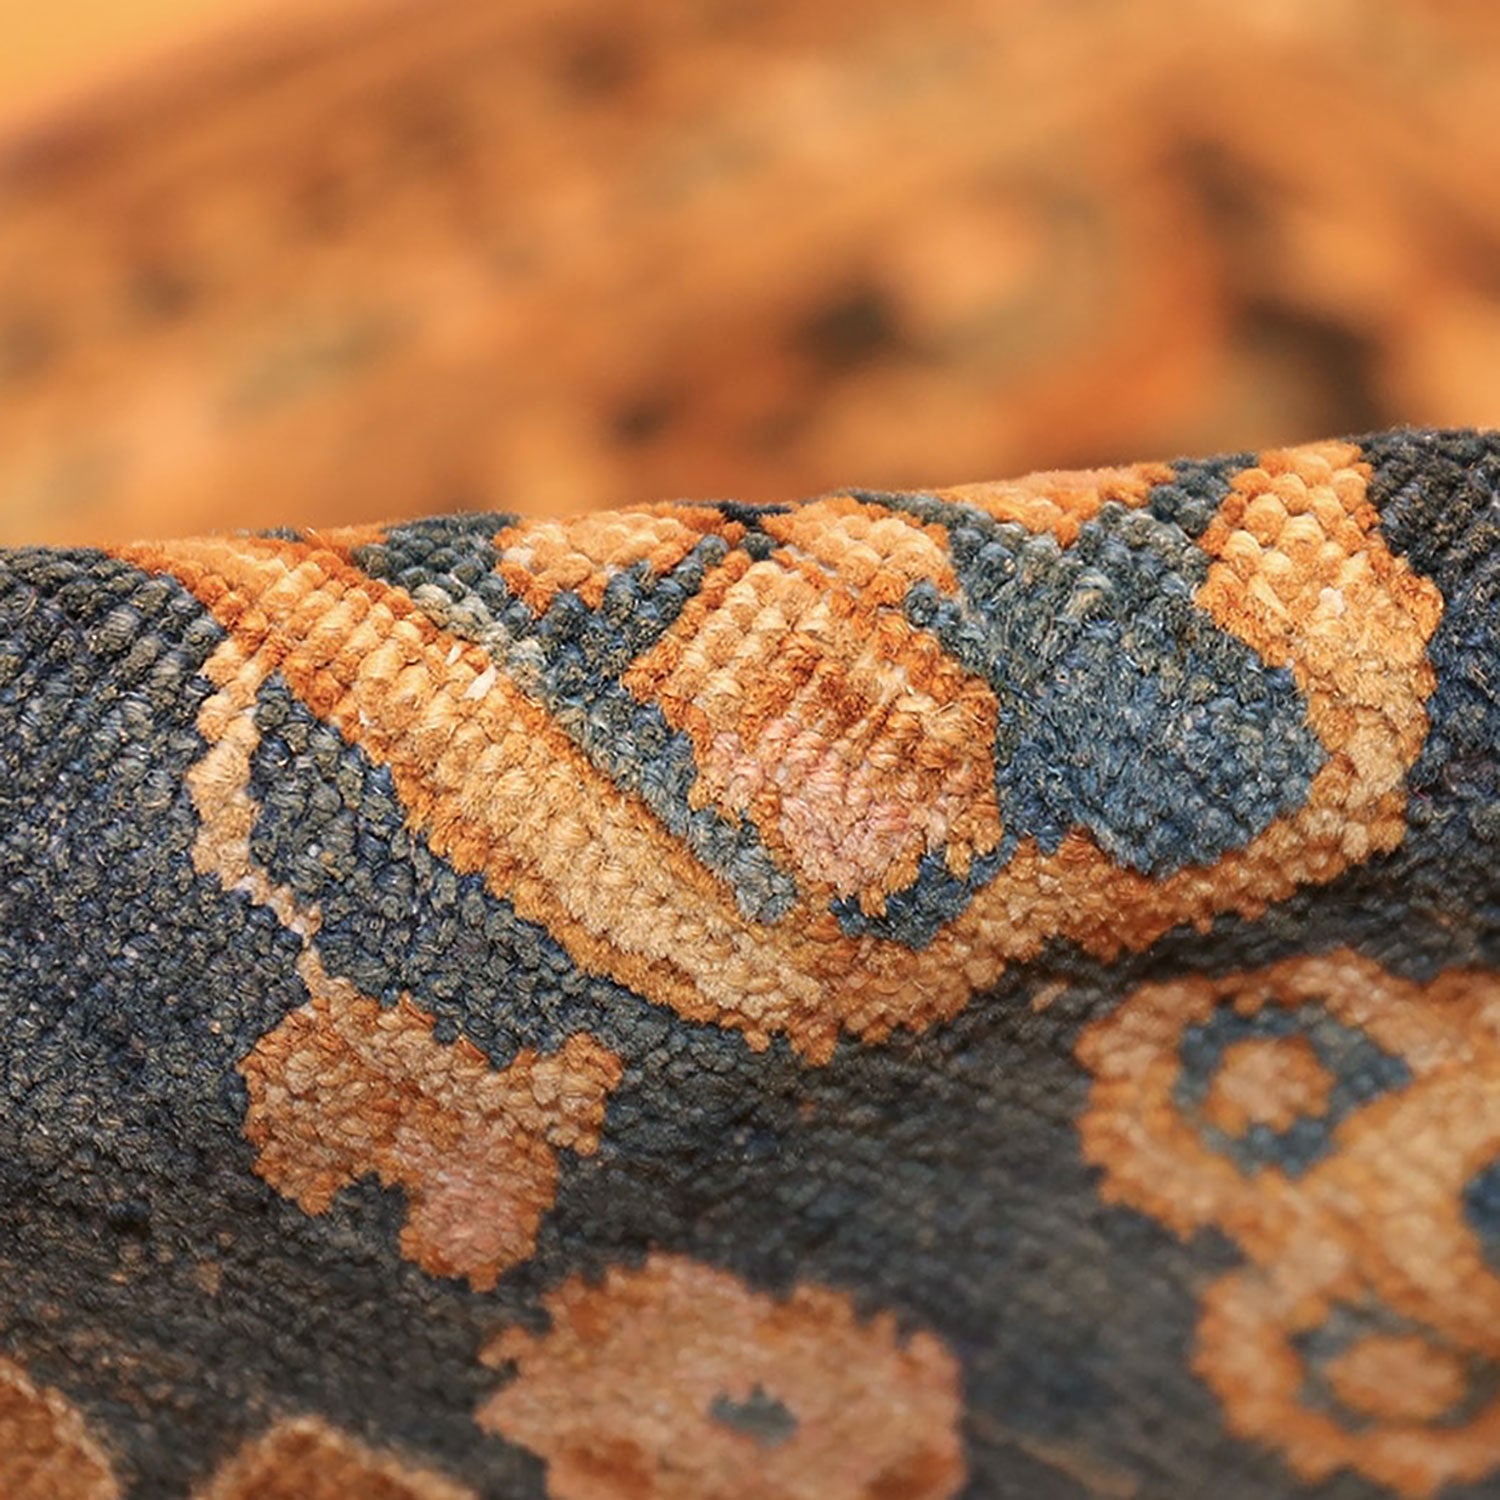 Close-up of textured fabric with orange and blue woven pattern.